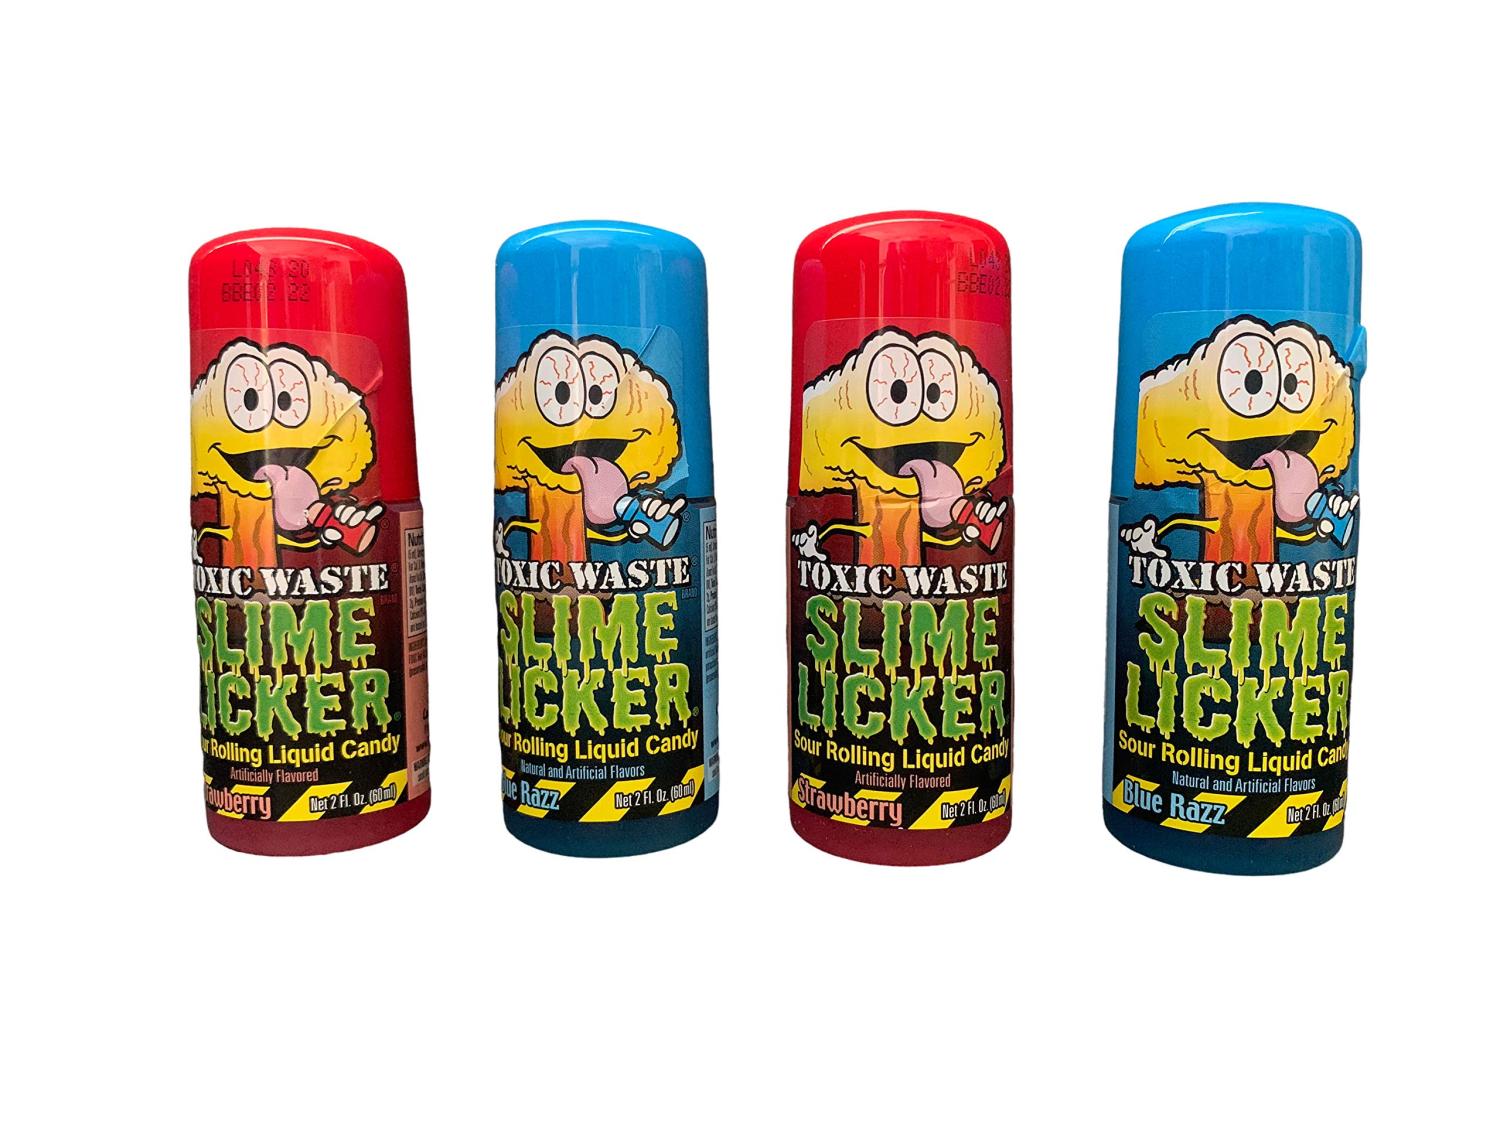 Slime Licker Bundle of Sour Rolling Liquid Candy Strawberry and Blue Razz  Two Each Flavor 2oz Each 2 Fl Oz (Pack of 4)